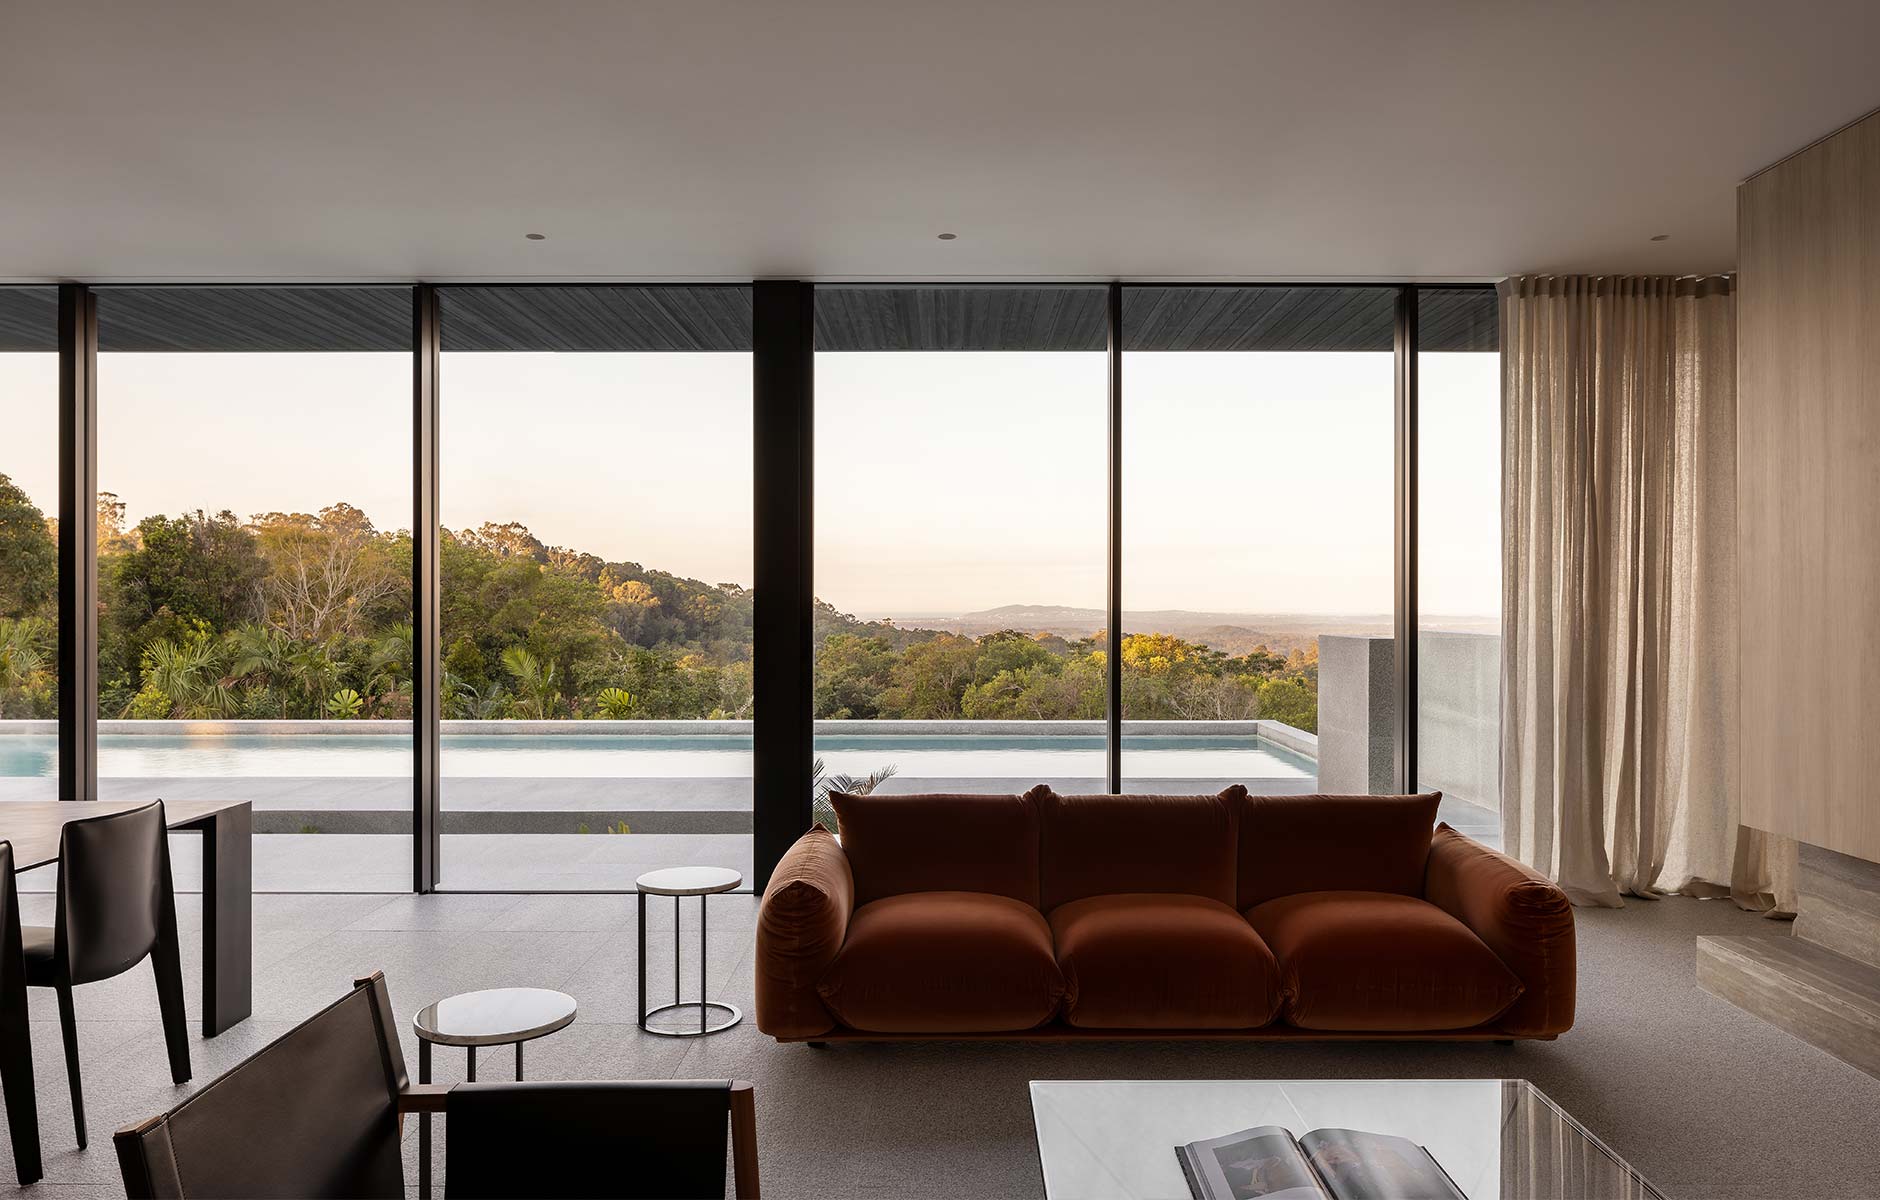 The Marenco Sofa by Arflex in an earthy rust velvet that balances with the surrounding landscape. Photo © Timothy Kaye